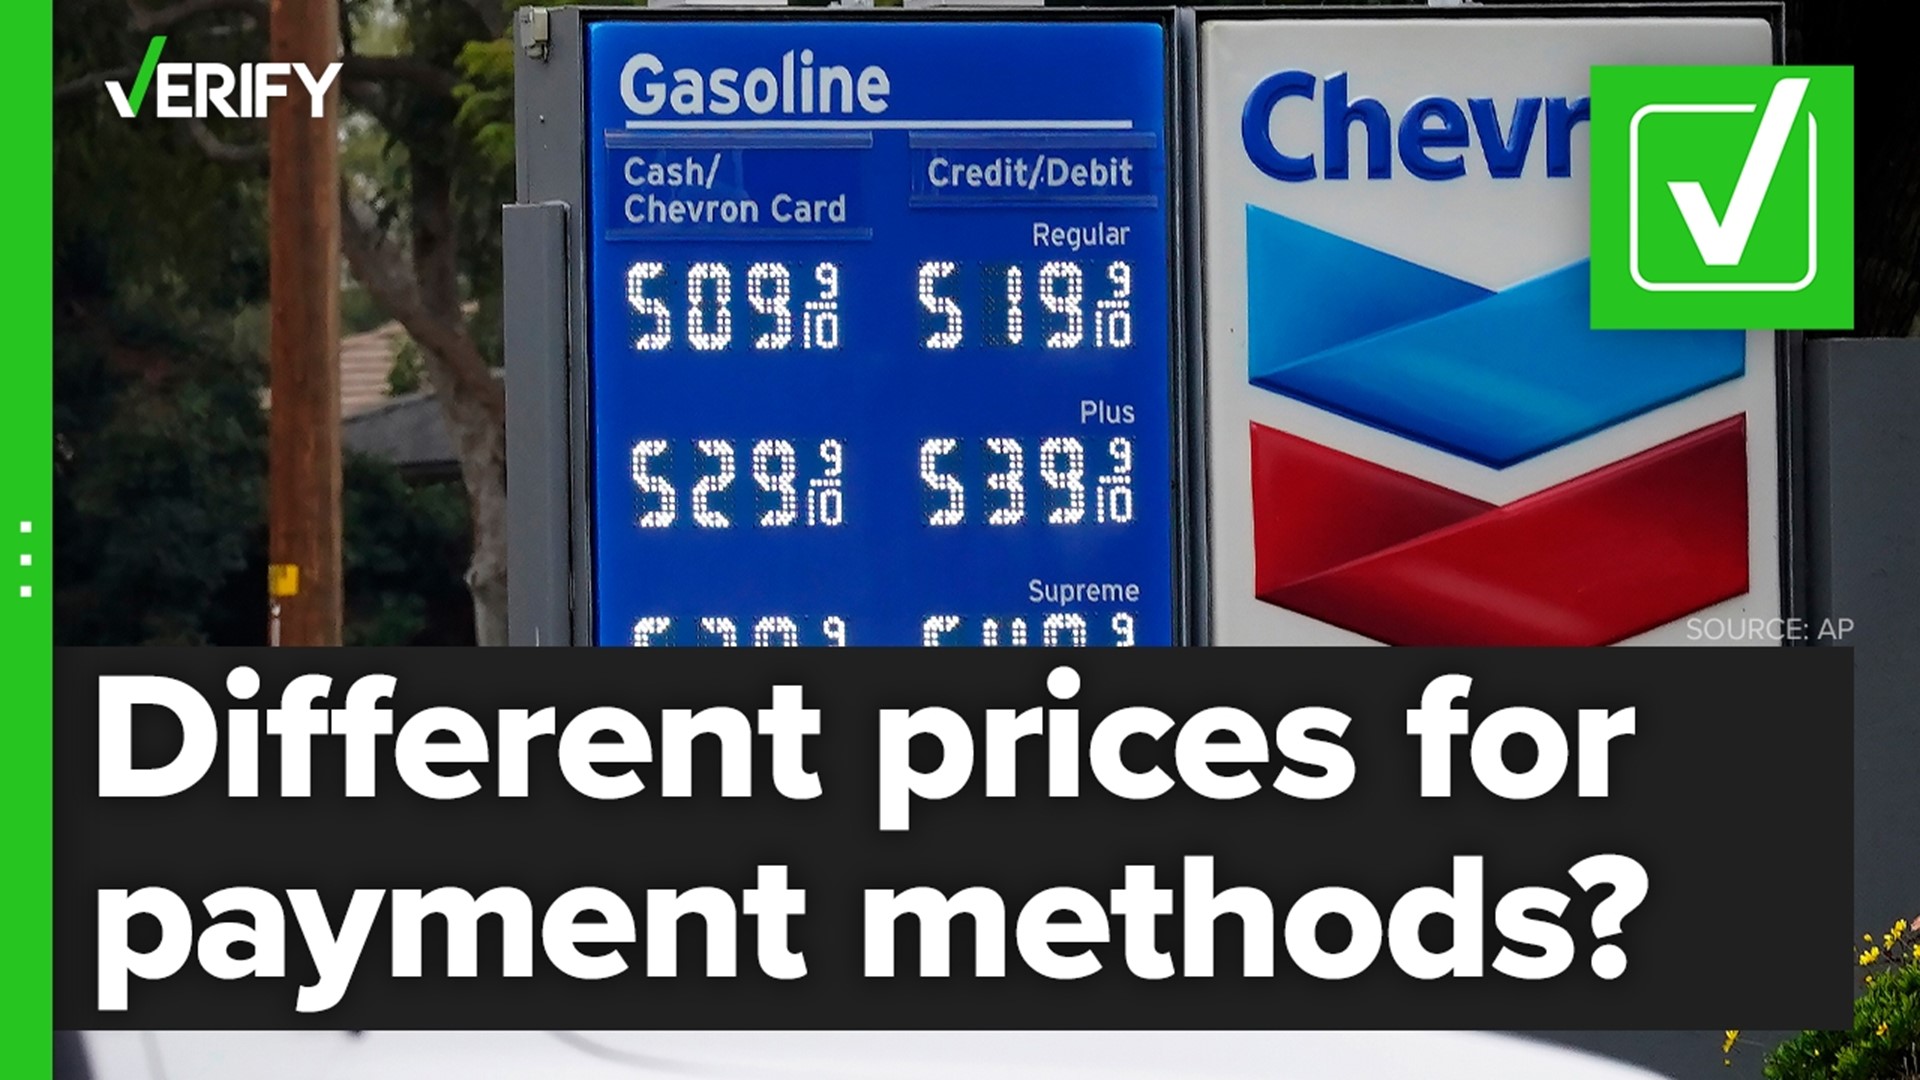 Some gas stations offer discounts to customers who use cash instead of credit to fuel up because credit cards come with processing fees for retailers.